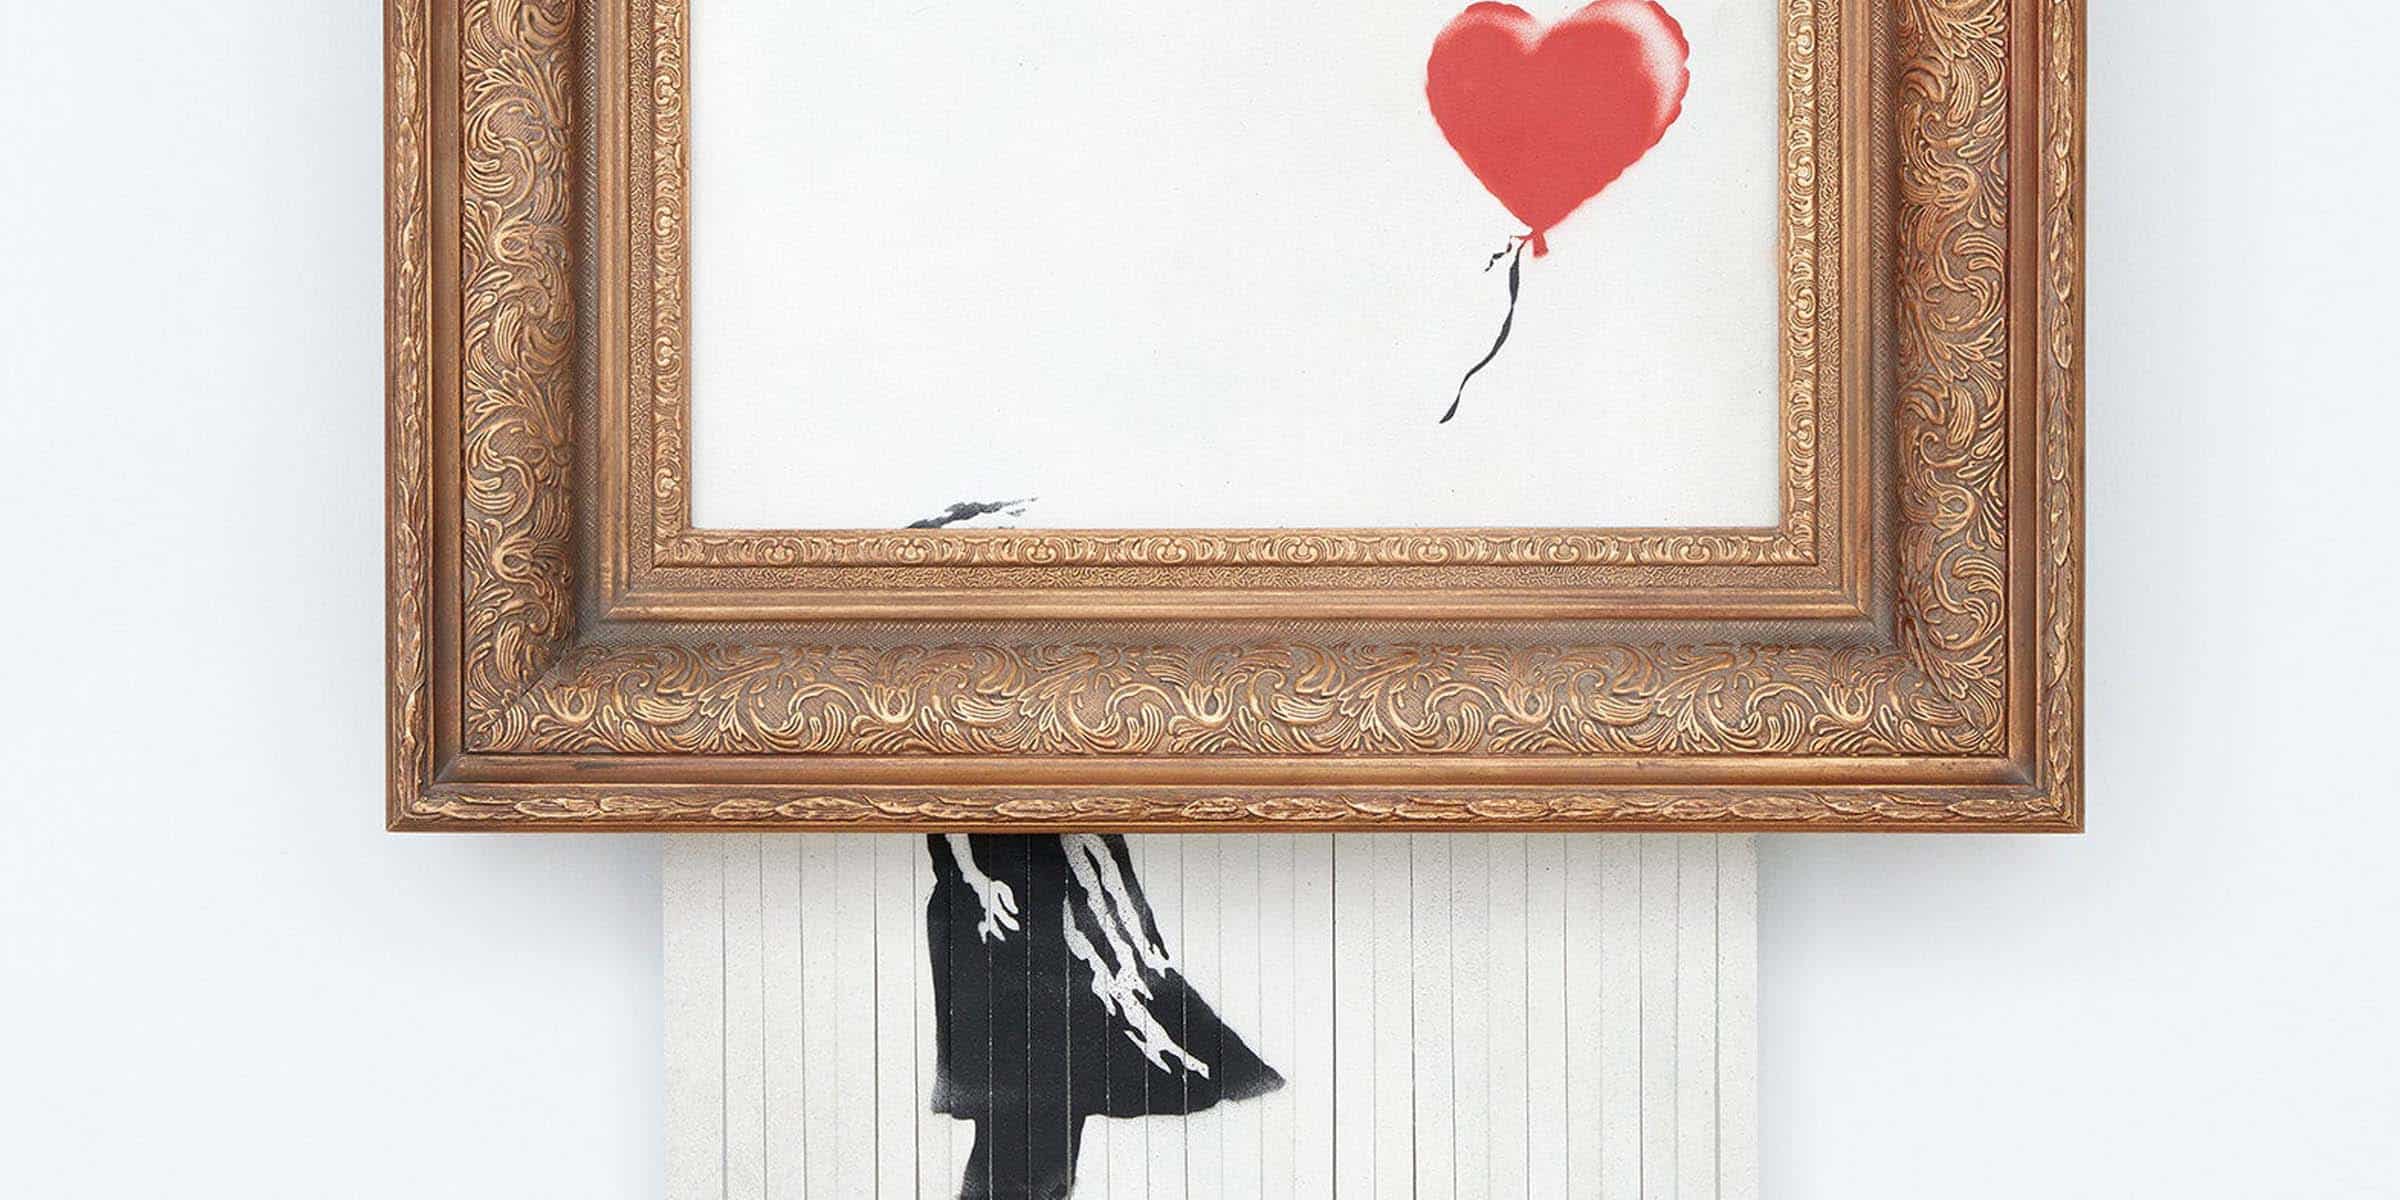 Shredding Expectations: The Record-Breaking Sales Of Banksy’s Art At Auctions